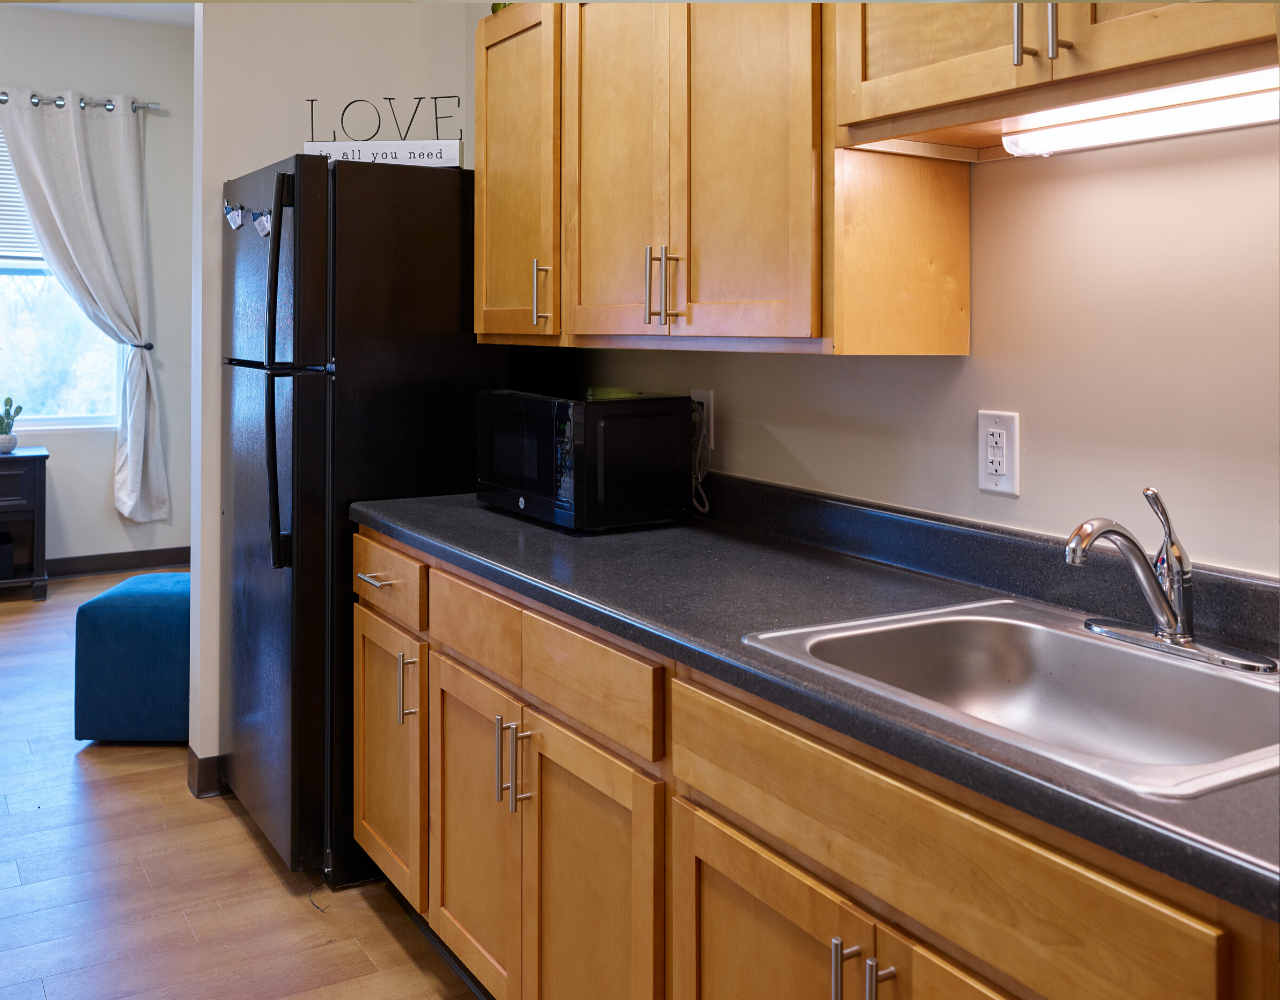 Assisted living studio apartment kitchen